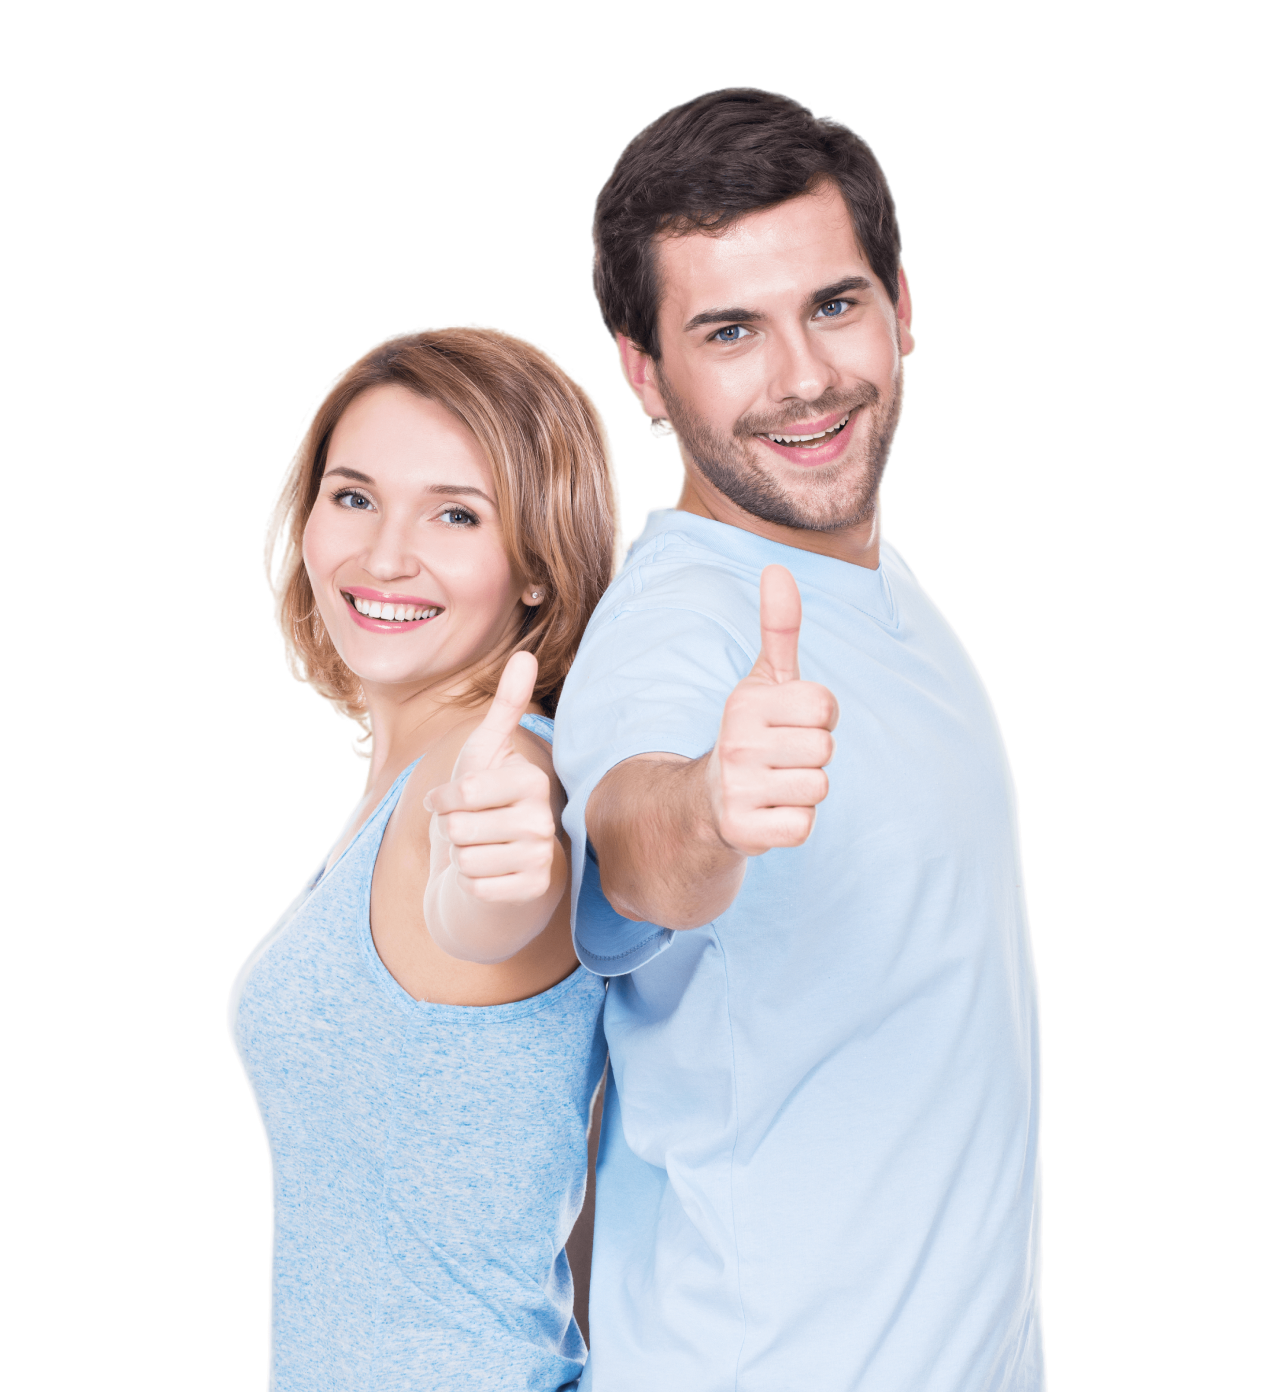 portrait-happy-couple-with-thumbs-up-sign-isolated-transformed 1